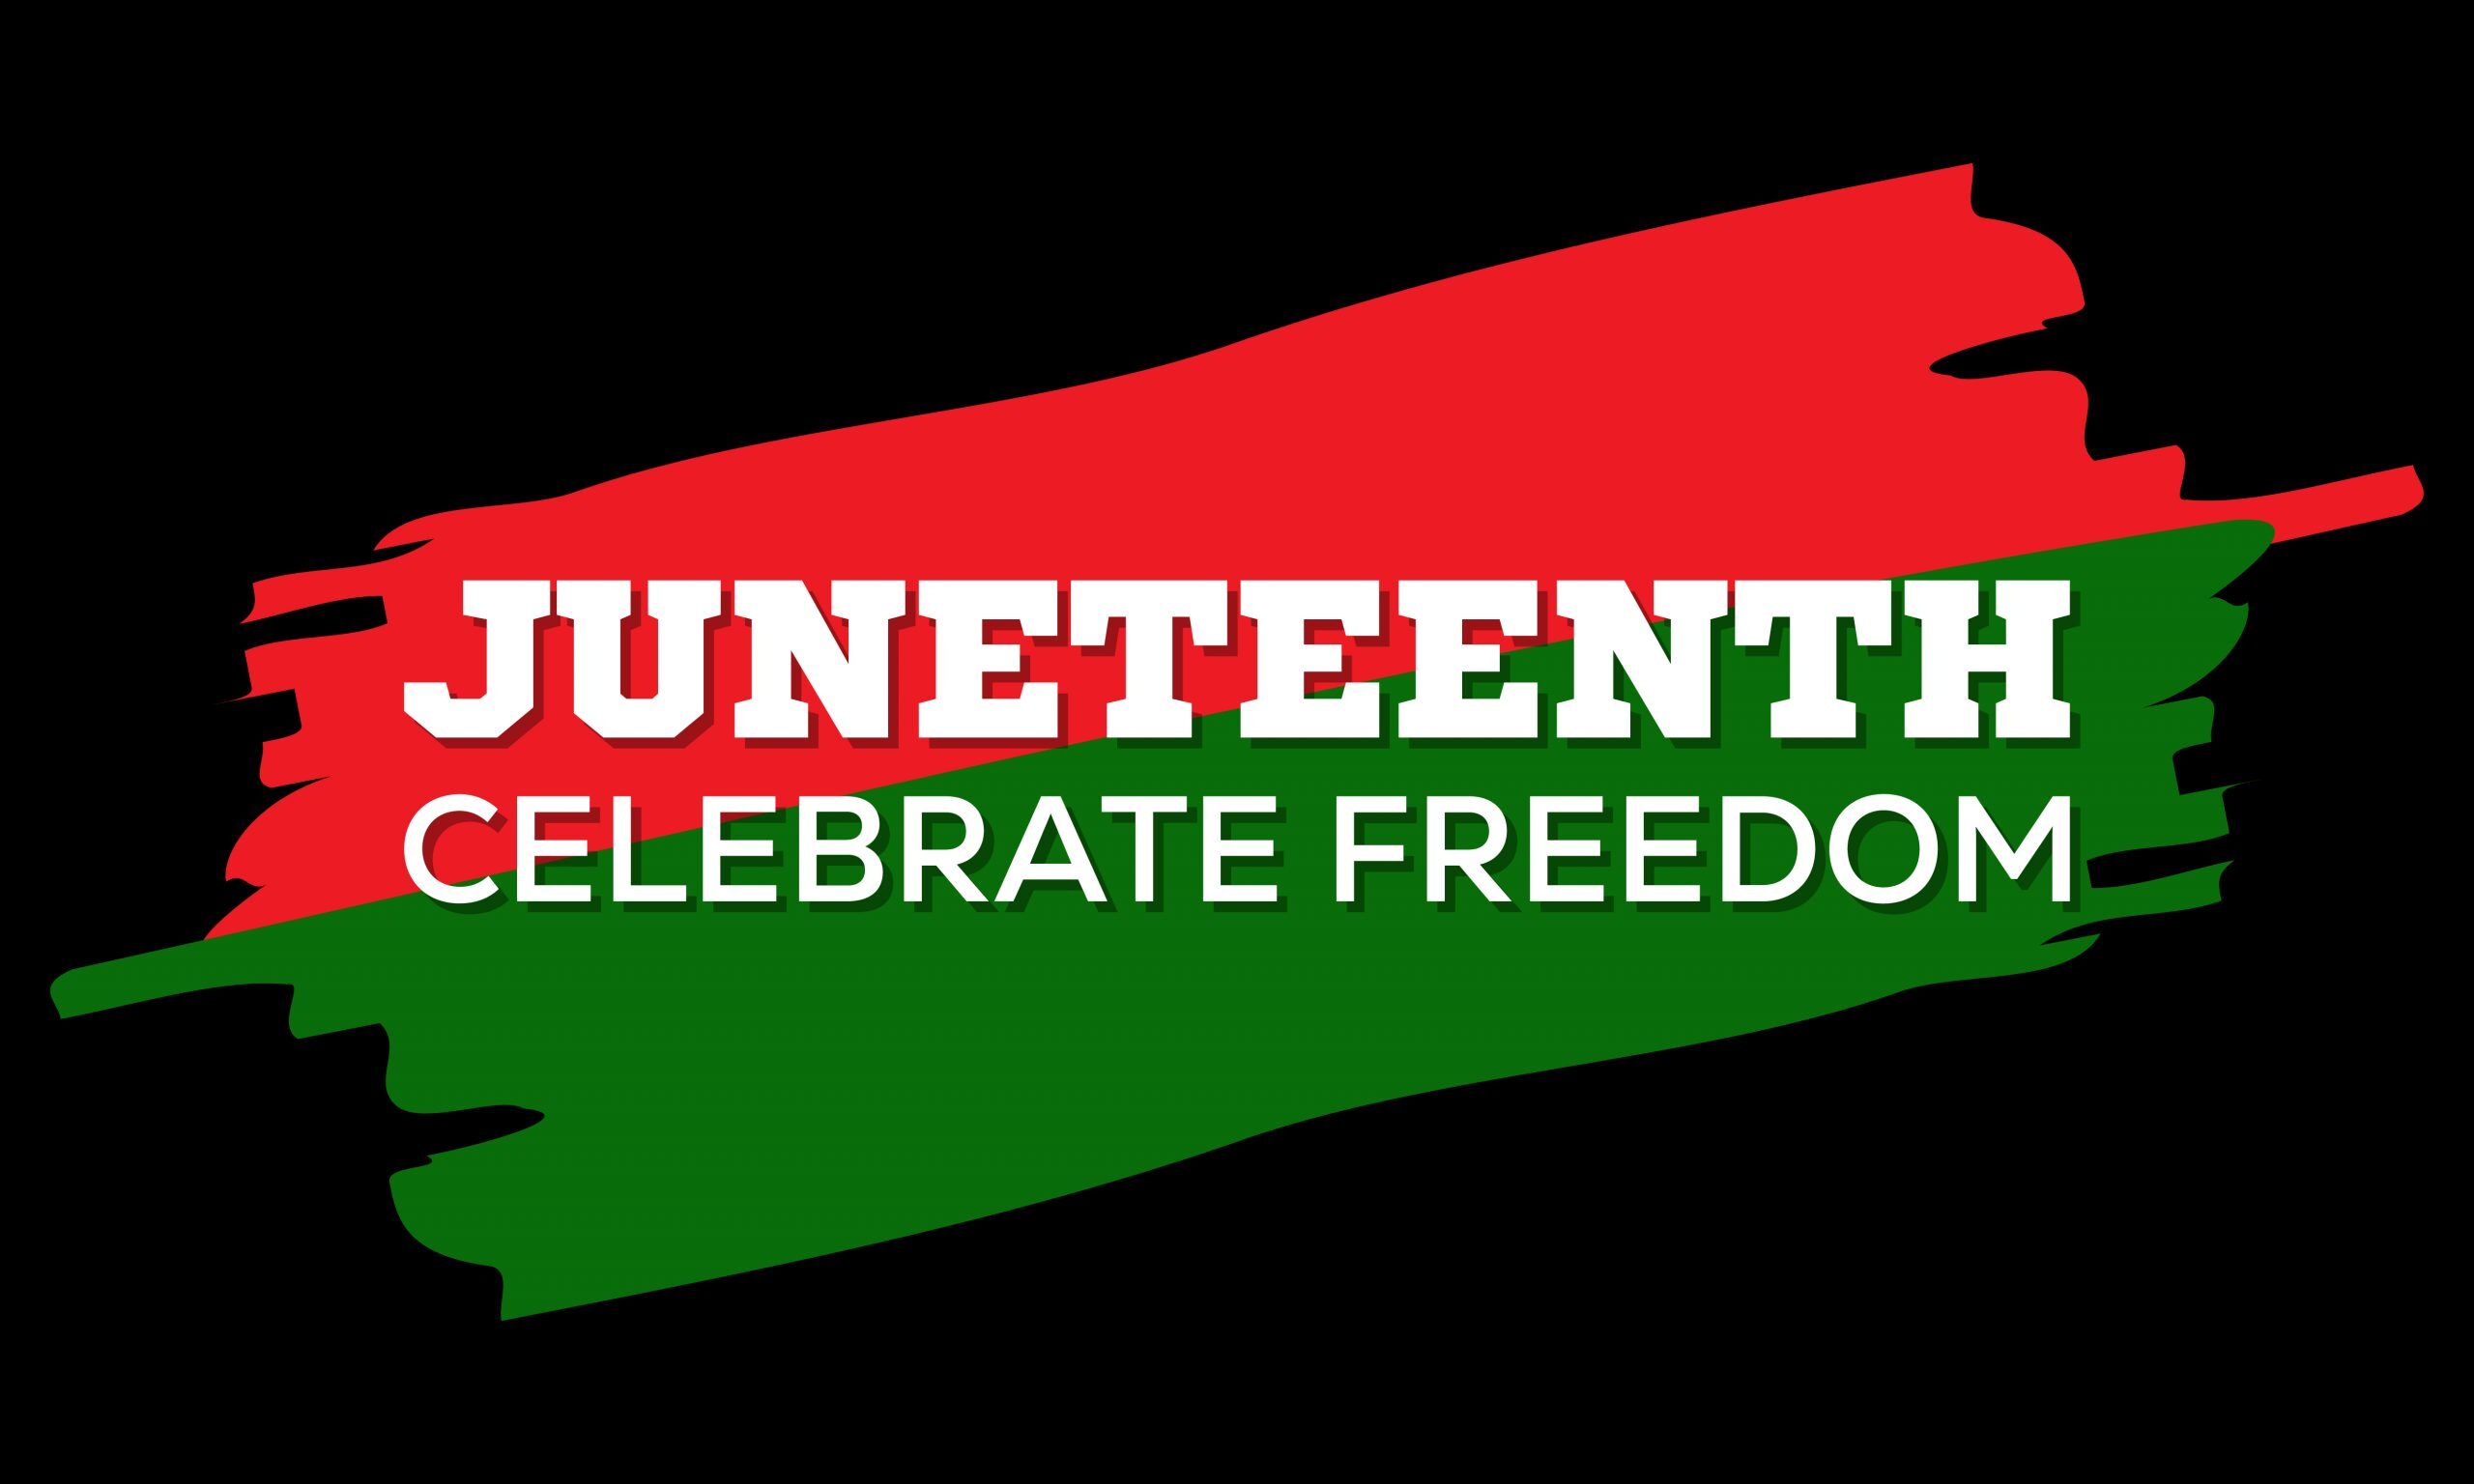 What is Juneteenth &#038; why is everyone talking about it?